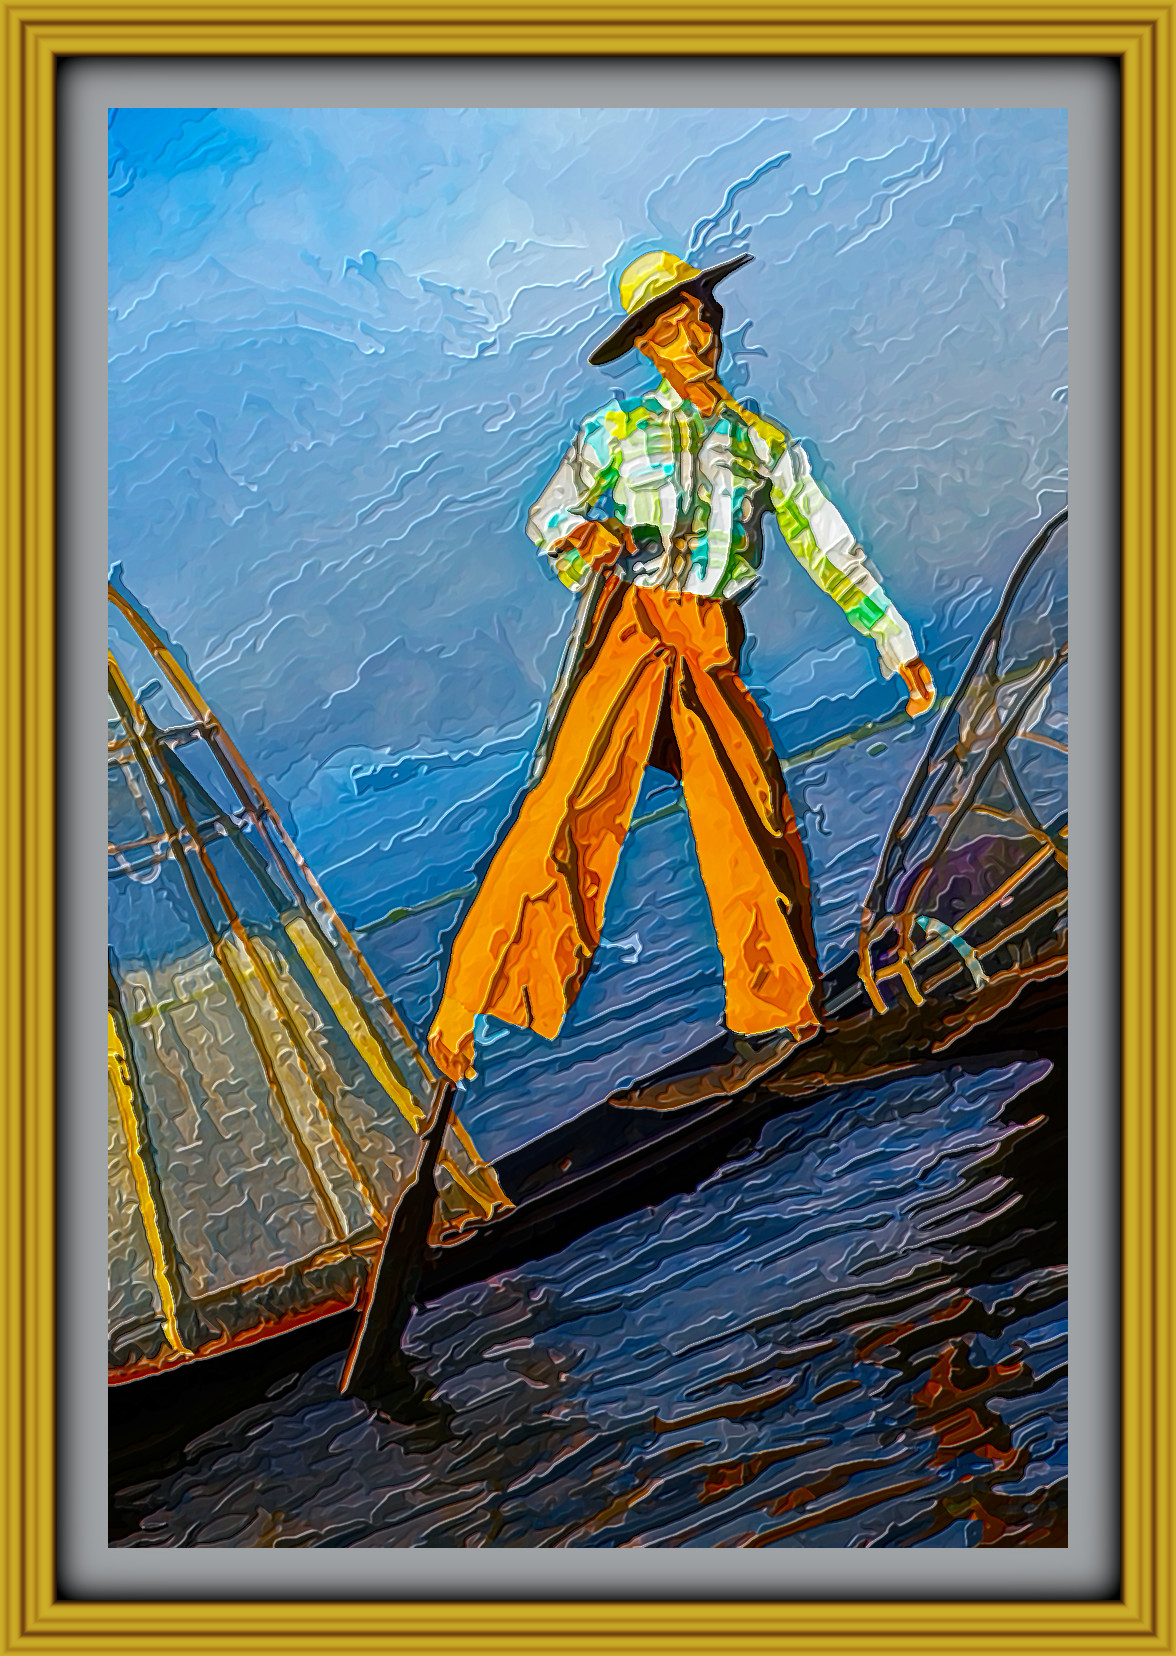 2024-02-15 09-52-03 Inle_Lake_Fisherman_Portrait_Myanmar_Colby_Brown_5 with JVID Embossed Graphic Effect, parms=1, 127.0, 6.0, 8.0, 7.5, 9.75, 1.5, 0.0, 0.jpeg